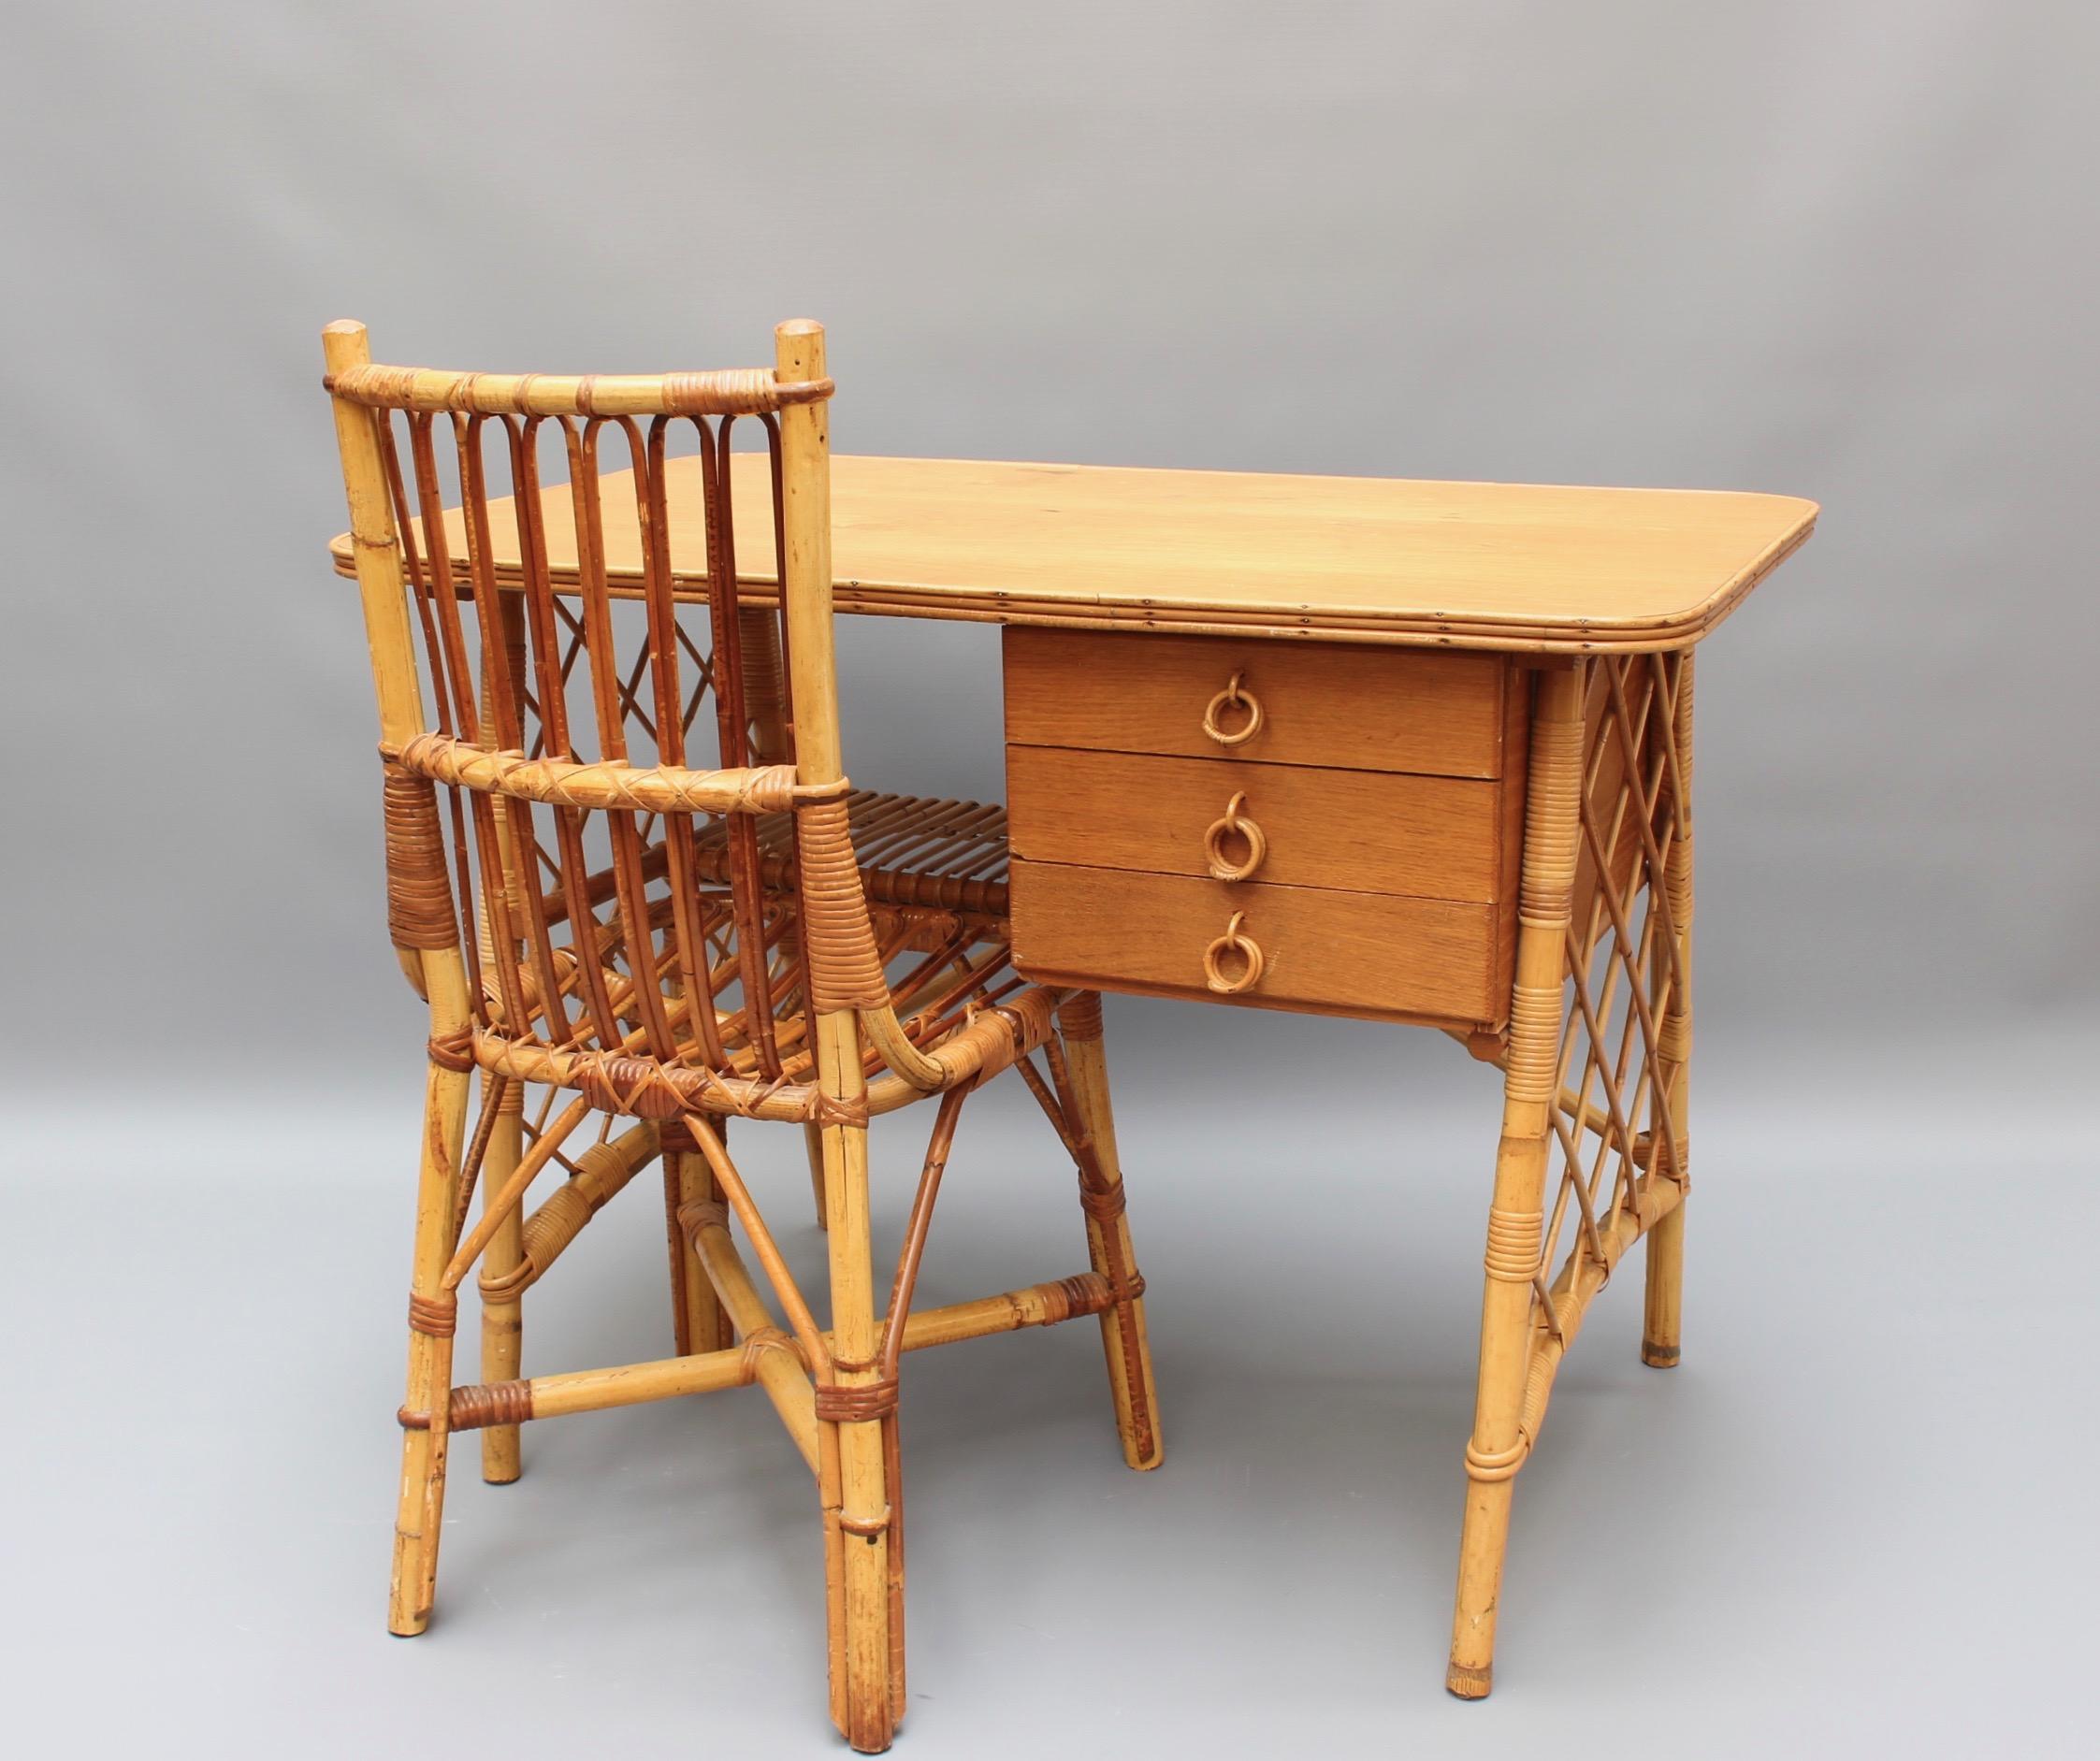 Rattan desk or vanity table and chair set by Louis Sognot (circa 1950s). Characteristic of its period, there are three drawers located under this rattan desk as well as a storage shelf. Rattan grilled panels connect the side legs. The desktop is